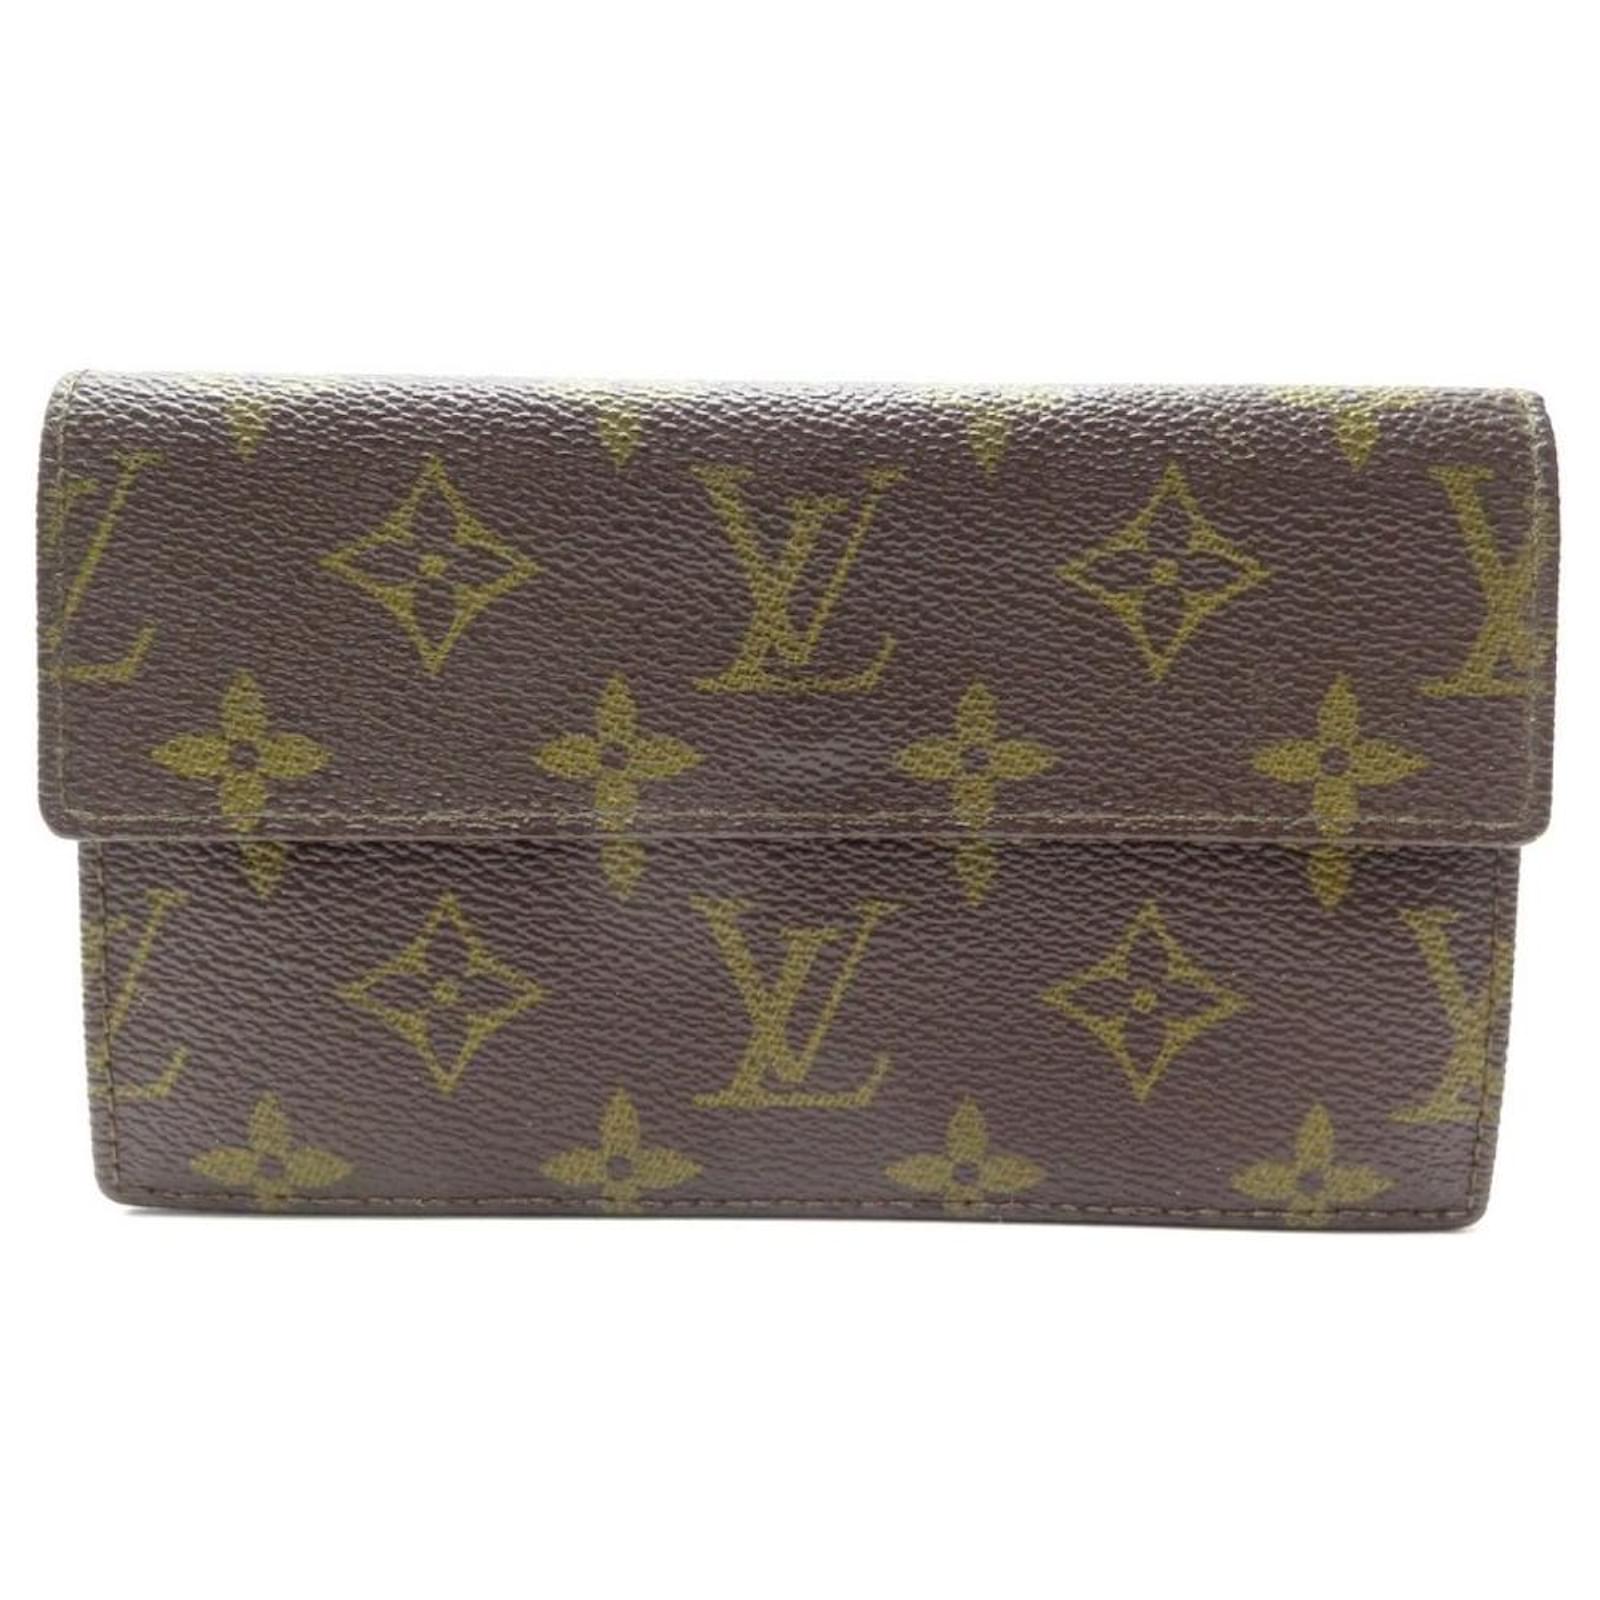 Louis Vuitton Perforated Monogram Canvas Key Pouch, Louis Vuitton  Small_Leather_Goods